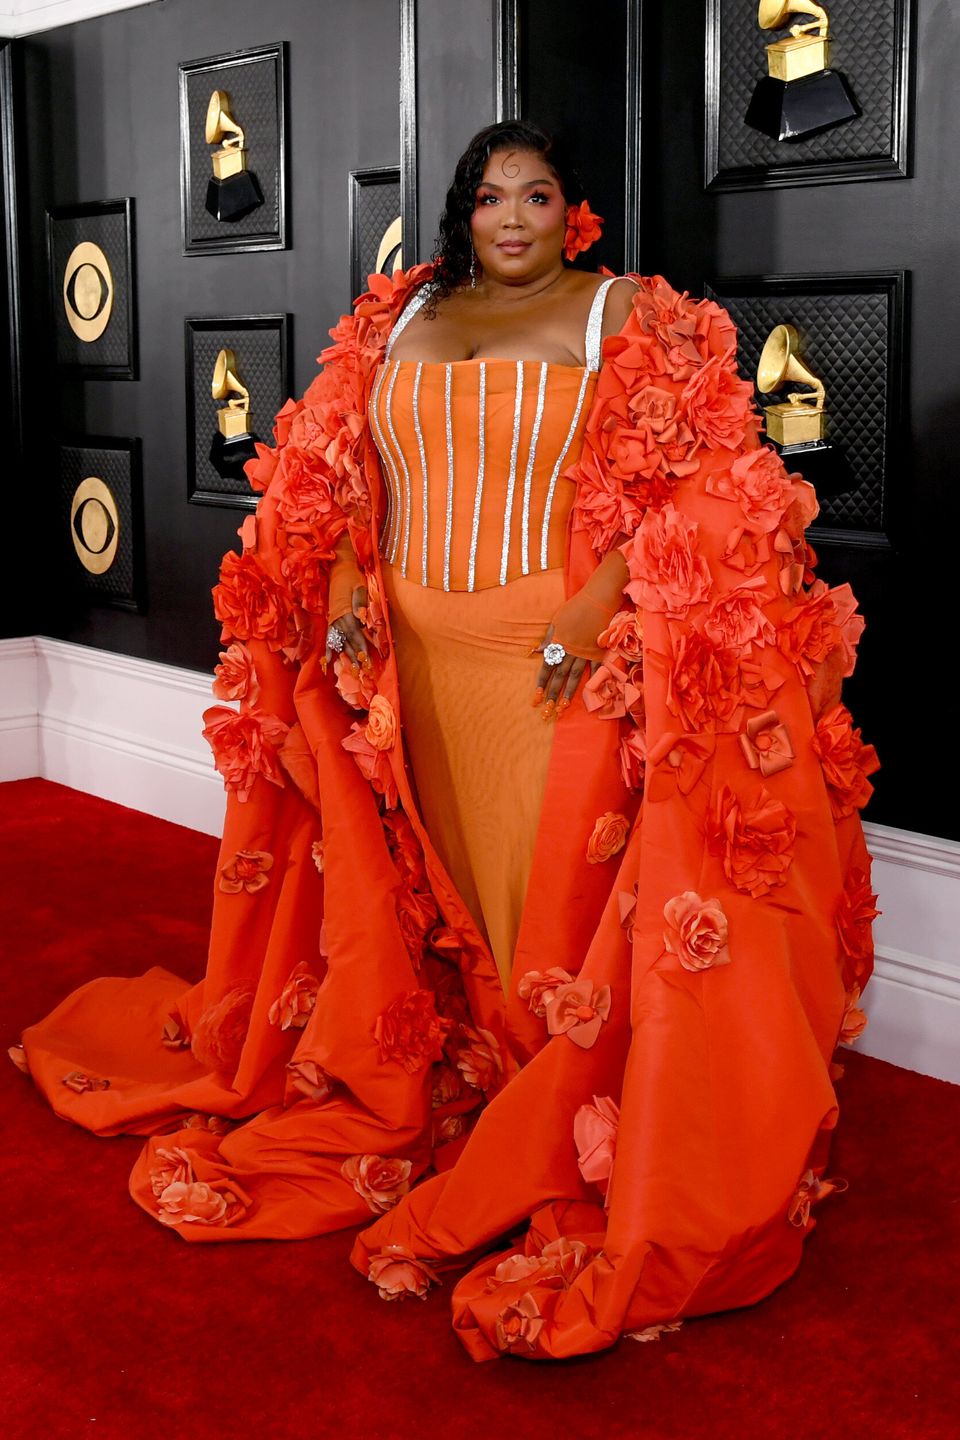 Stars On The Grammys Red Carpet Share Their Favorite Rising Artists